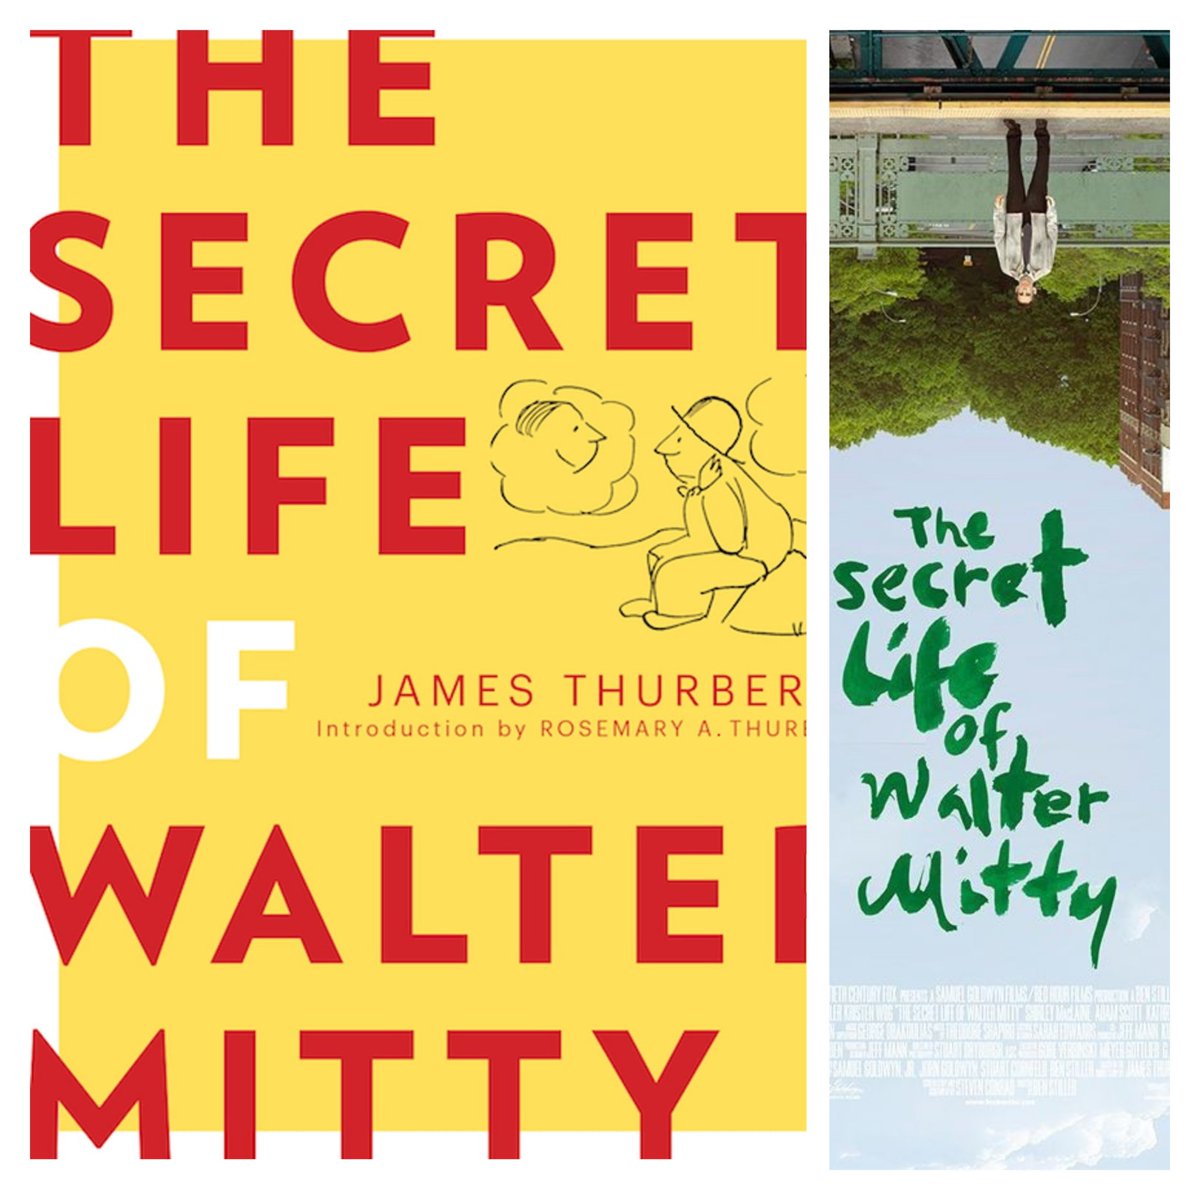 Classy Adventure film 'THE SECRET LIFE OF WALTER MITTY' was developed from short story,Which was published in 1939 JamesThurber in 'THE SECRET LIFE OF WALTER MITTY'